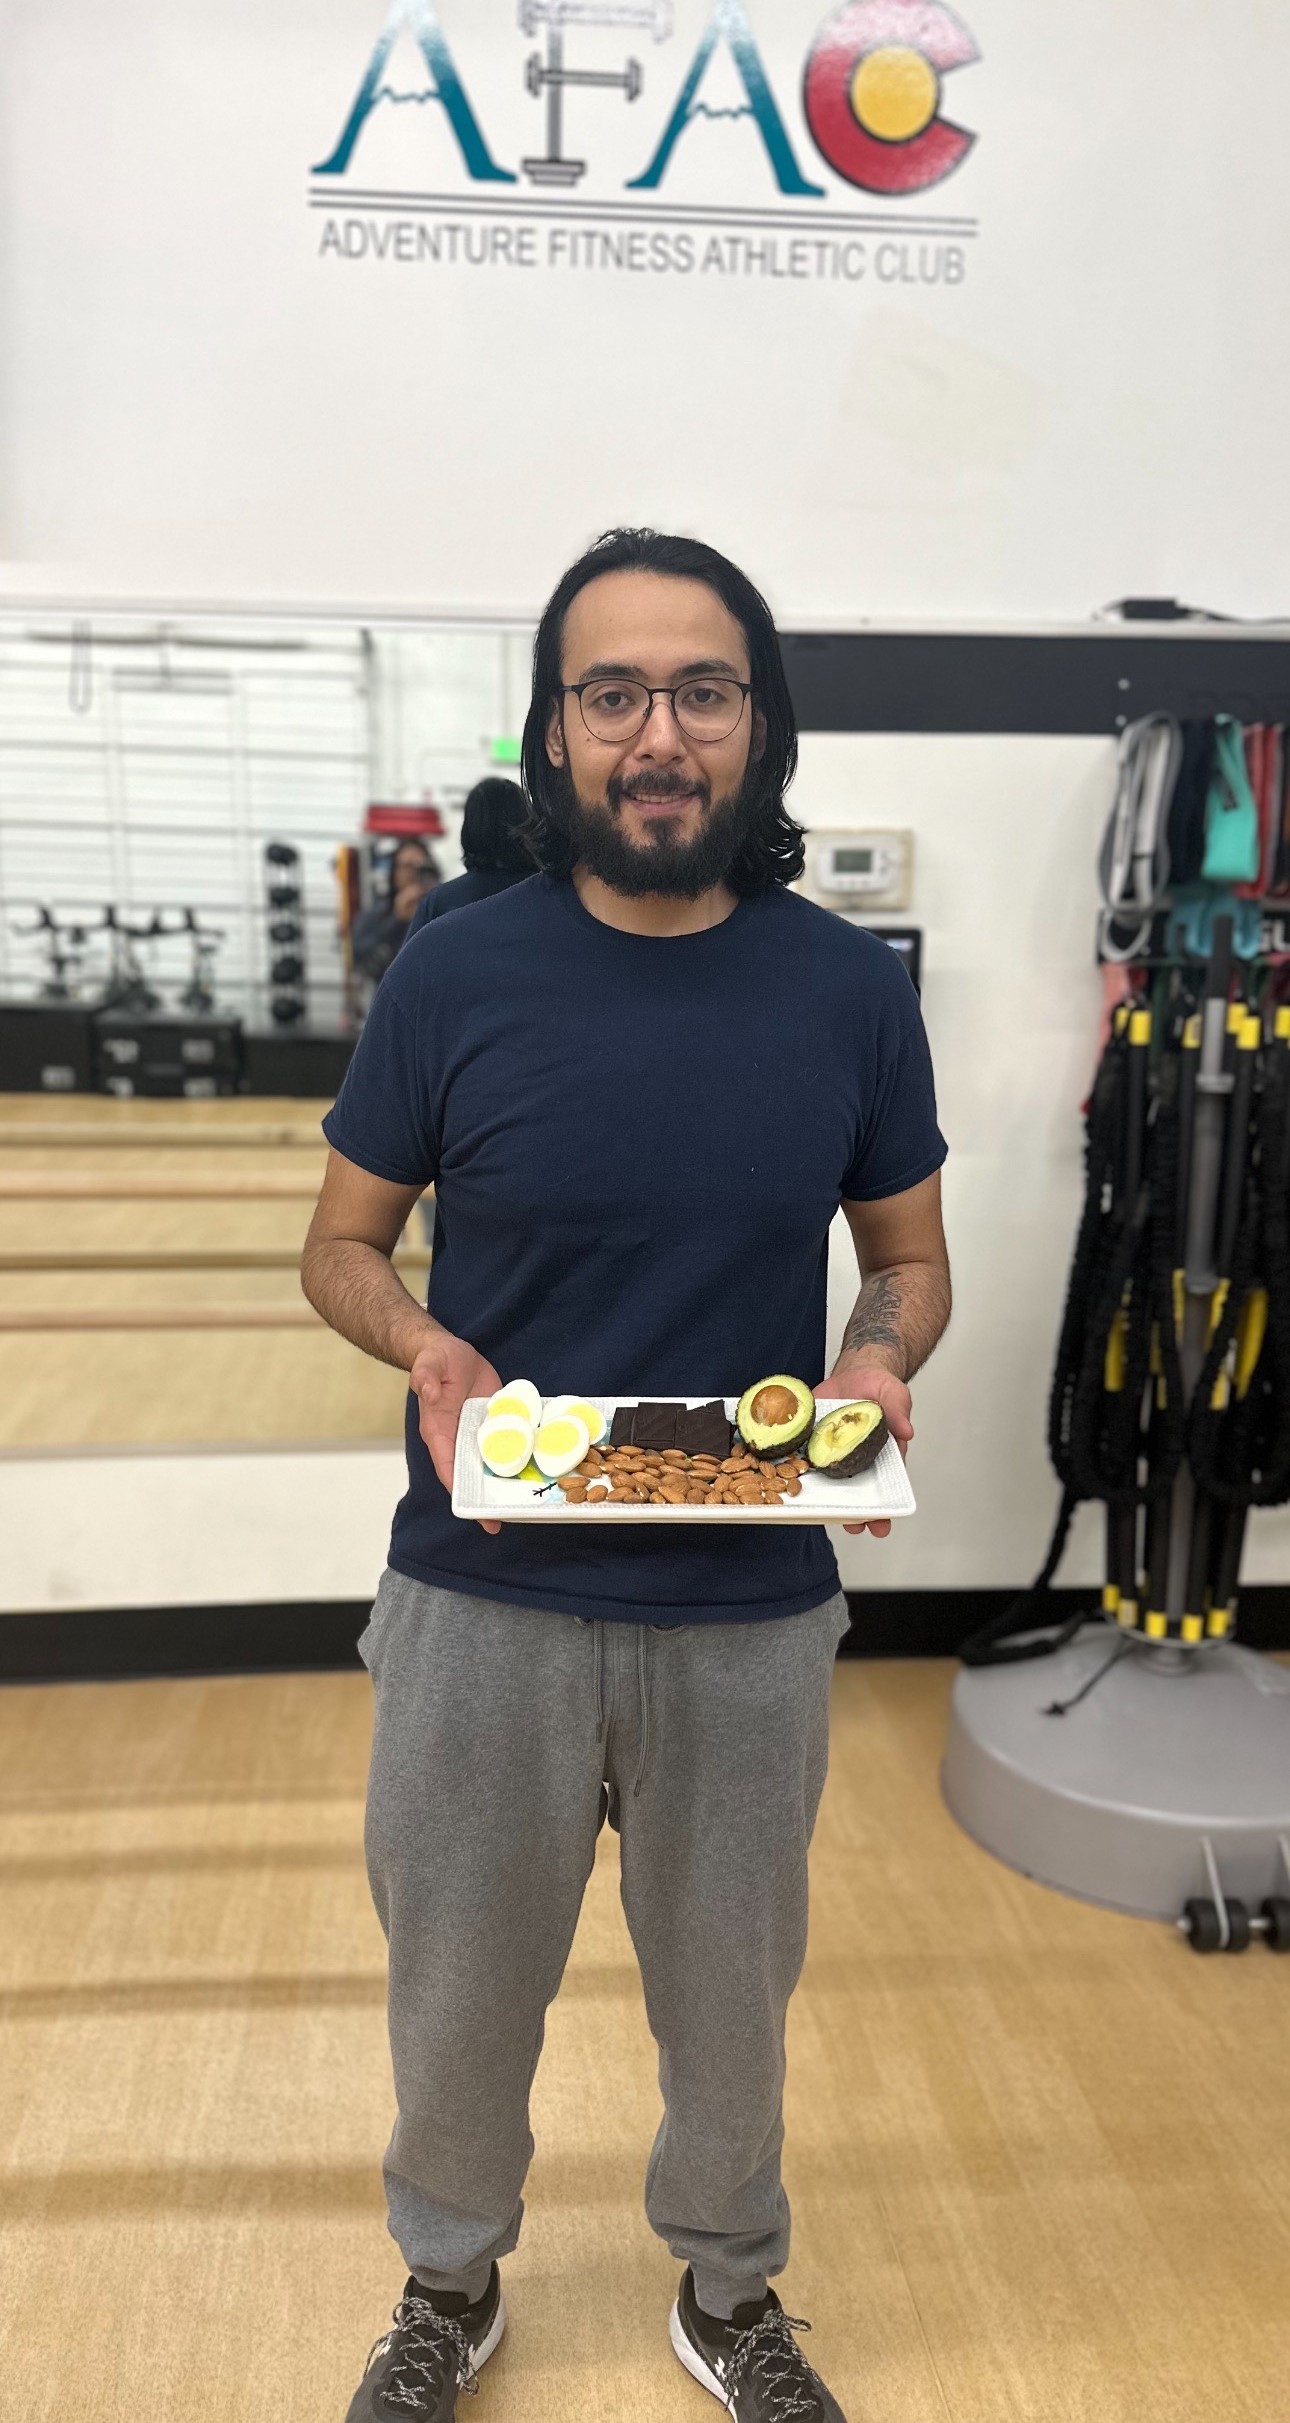 Man standing at AFAC gym, holding a plate full of food including avocados, almonds, and hard-boiled eggs